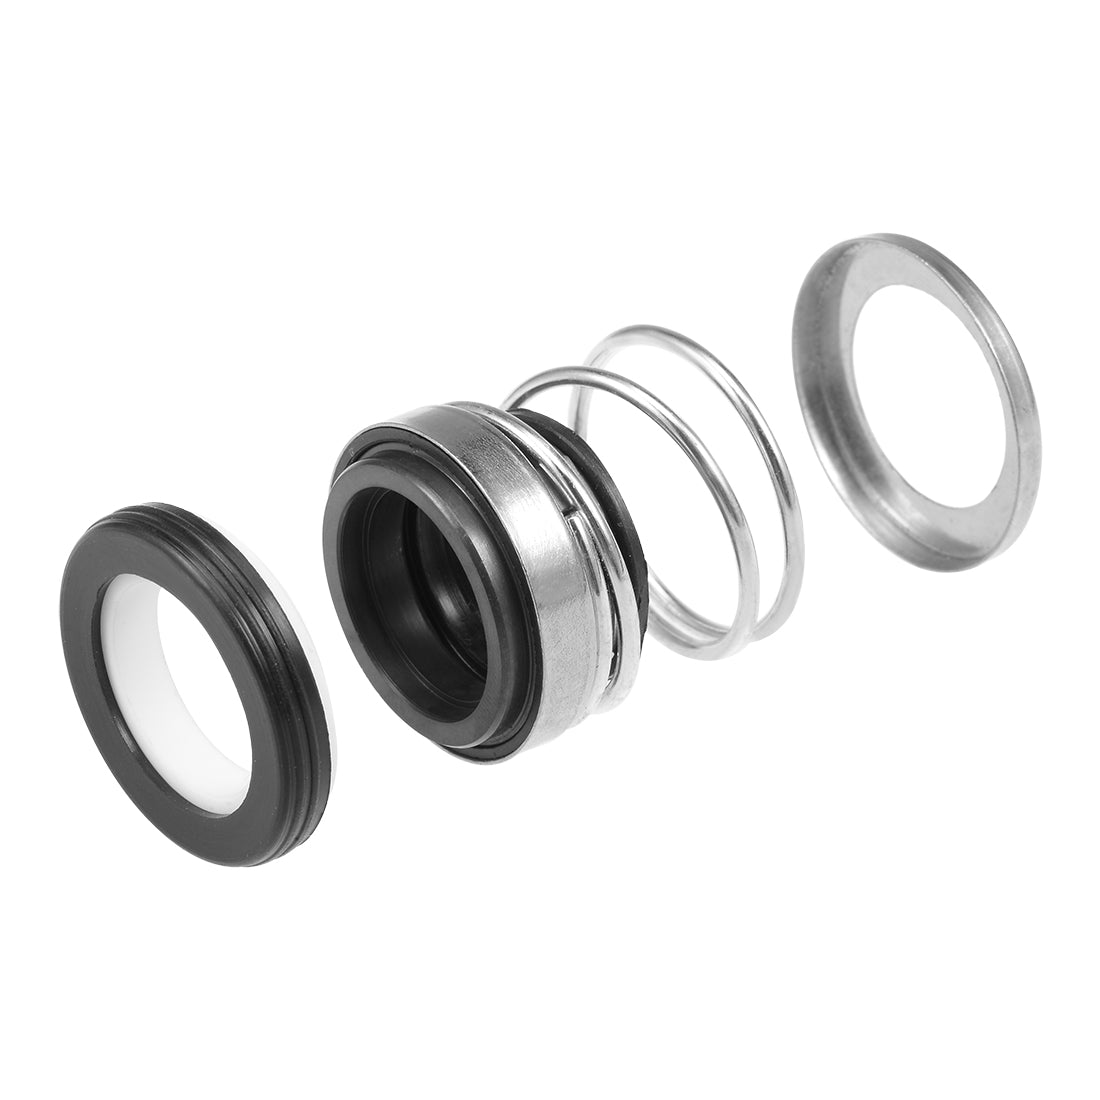 uxcell Uxcell Mechanical Shaft Seal Replacement for Pool Spa Pump 108-16